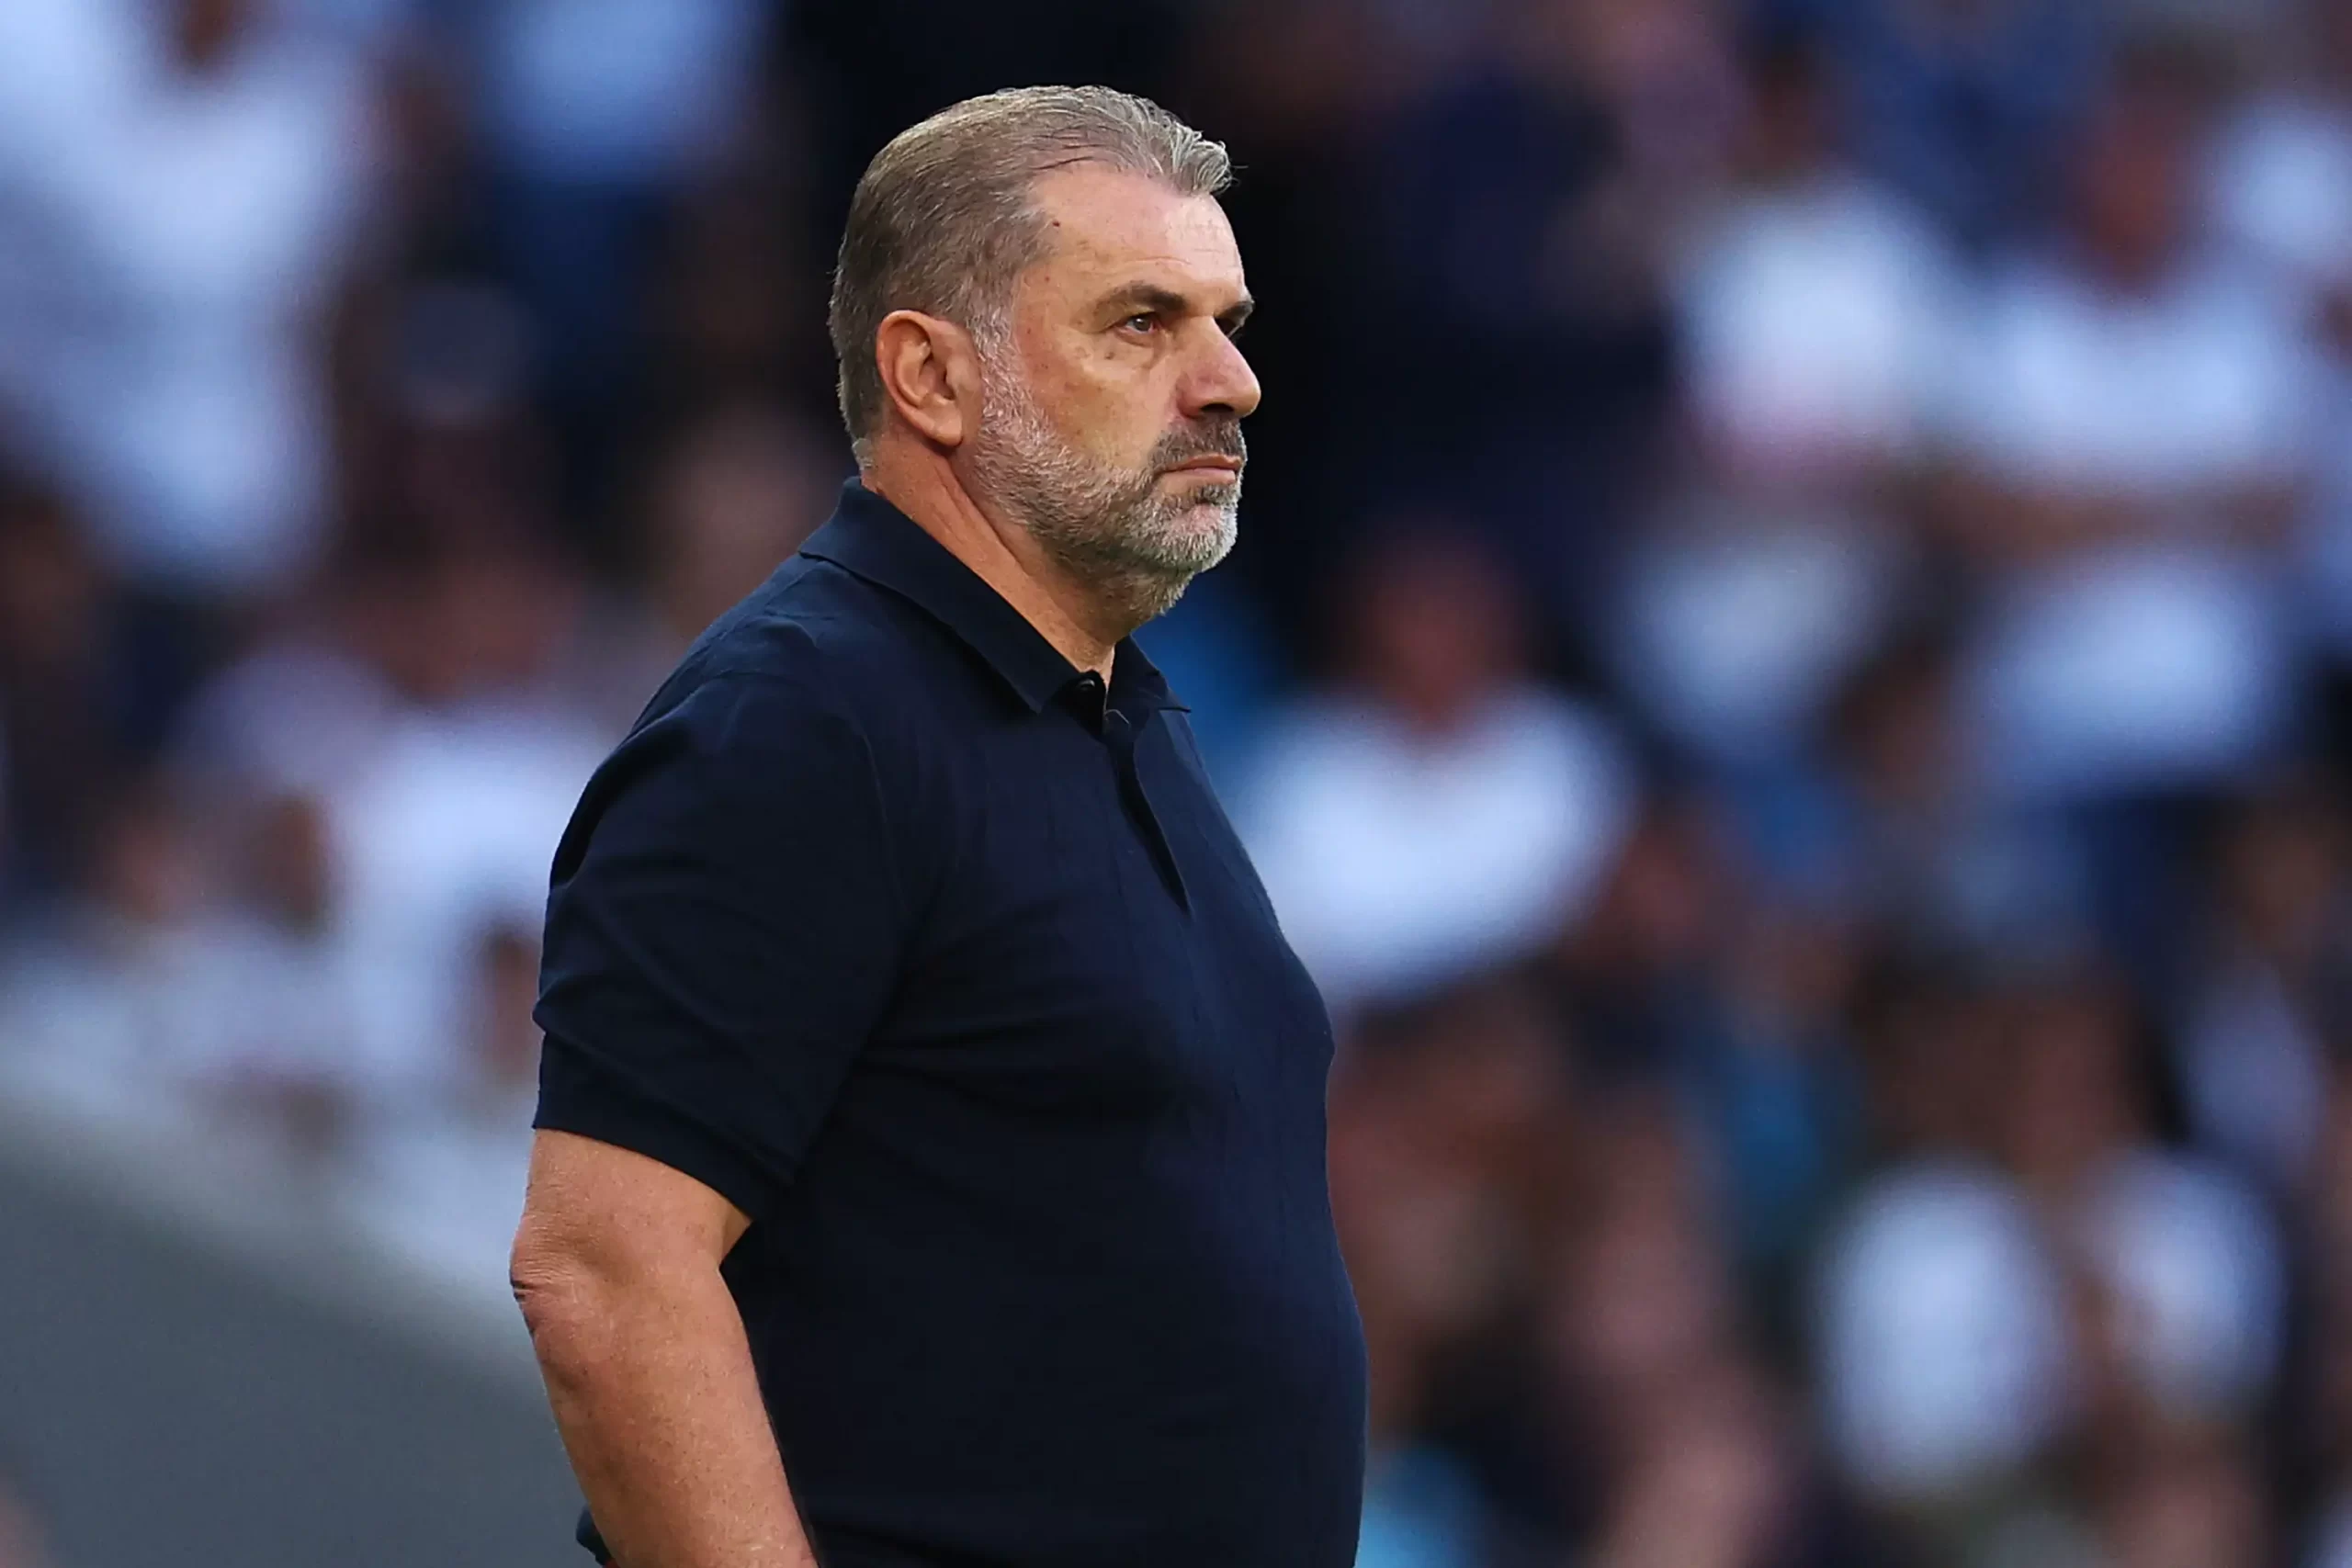 Tottenham boss Ange Postecoglou responds sarcastically to top-four claims after Fulham loss.